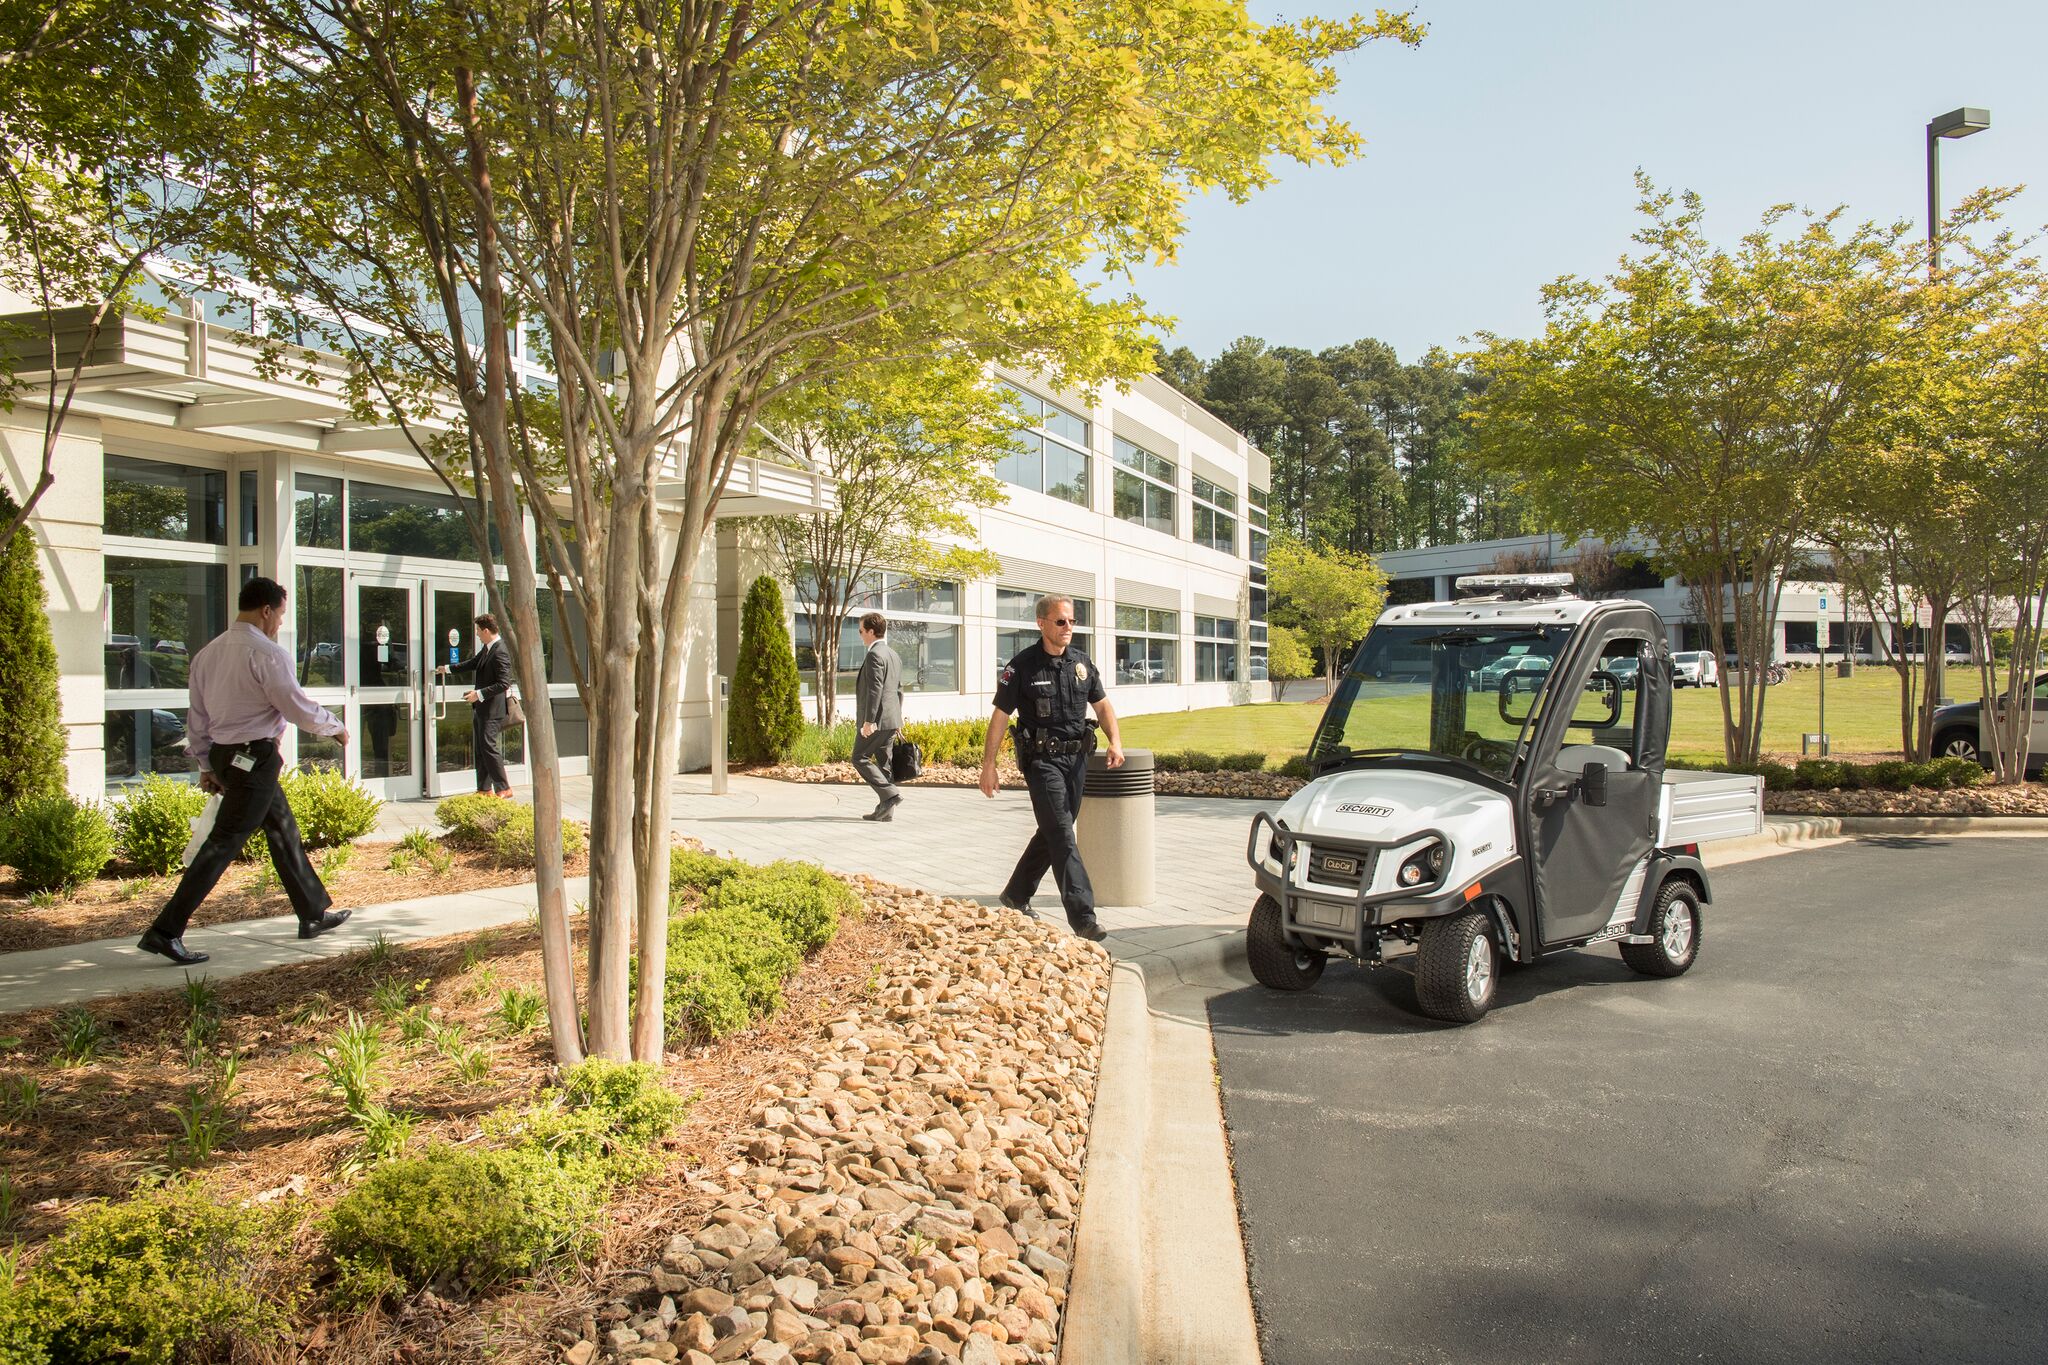 The Carryall 300 Security Vehicle is equipped for long security details.